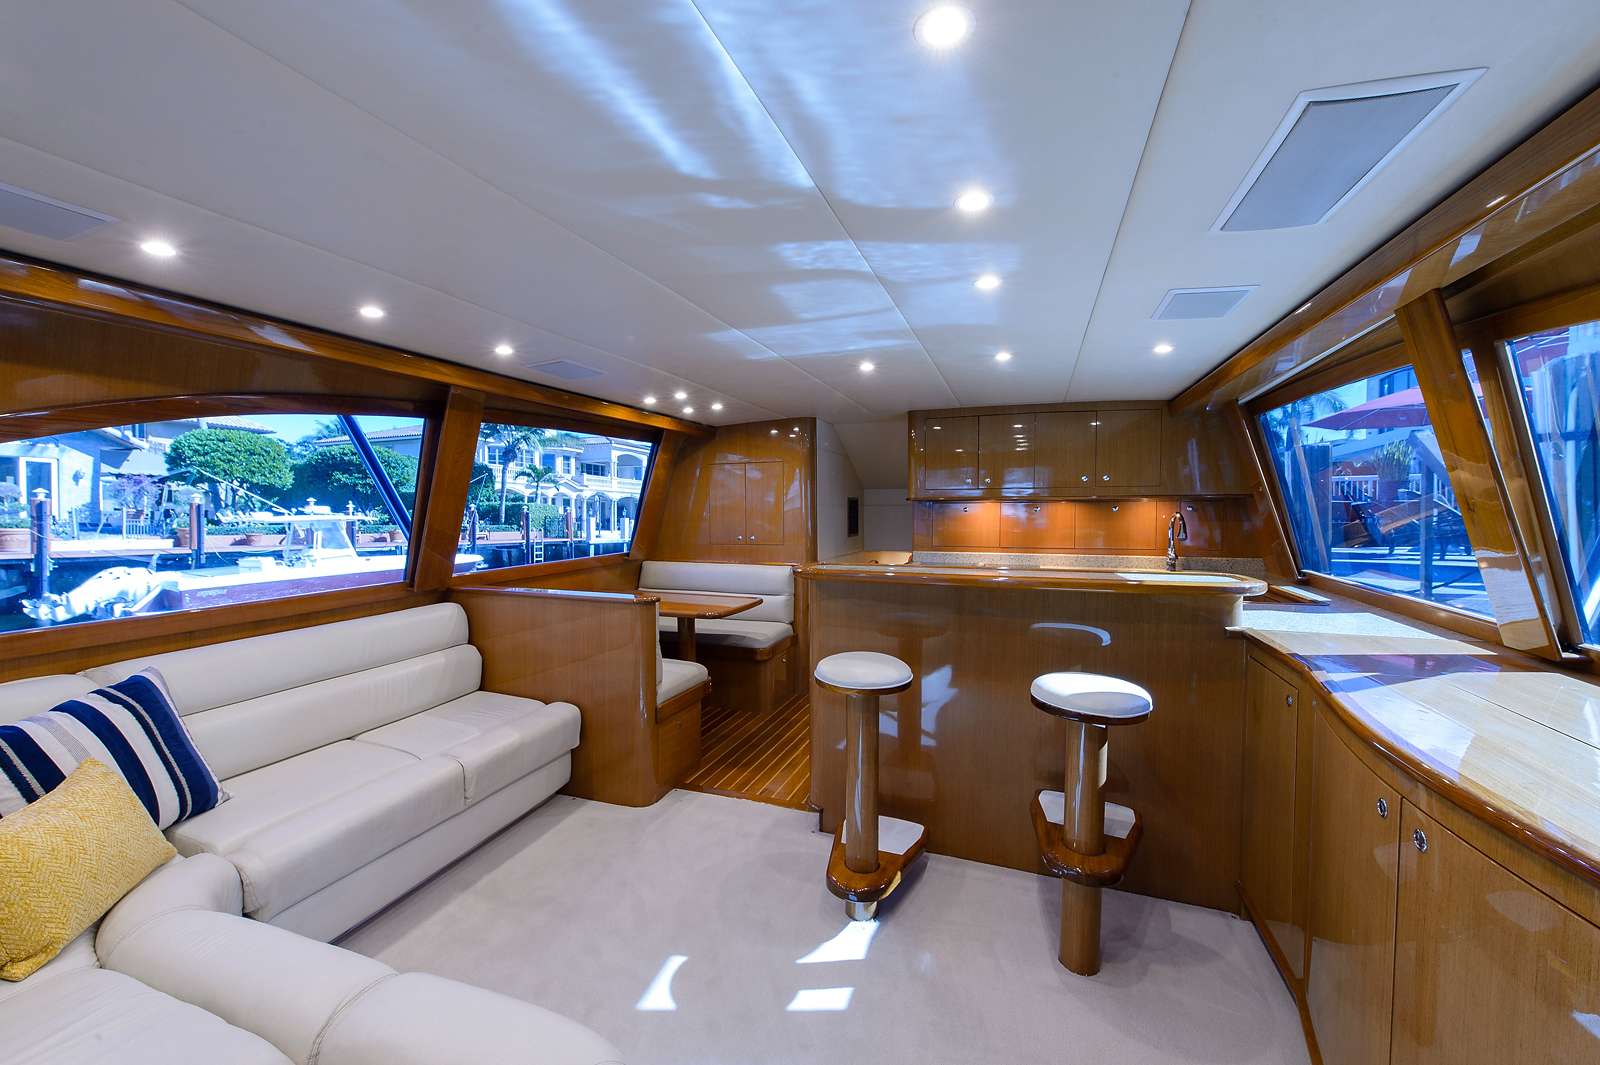 Electric Bill - Motor Boat Charter Mexico & Boat hire in US East Coast, Bahamas & Mexico 2